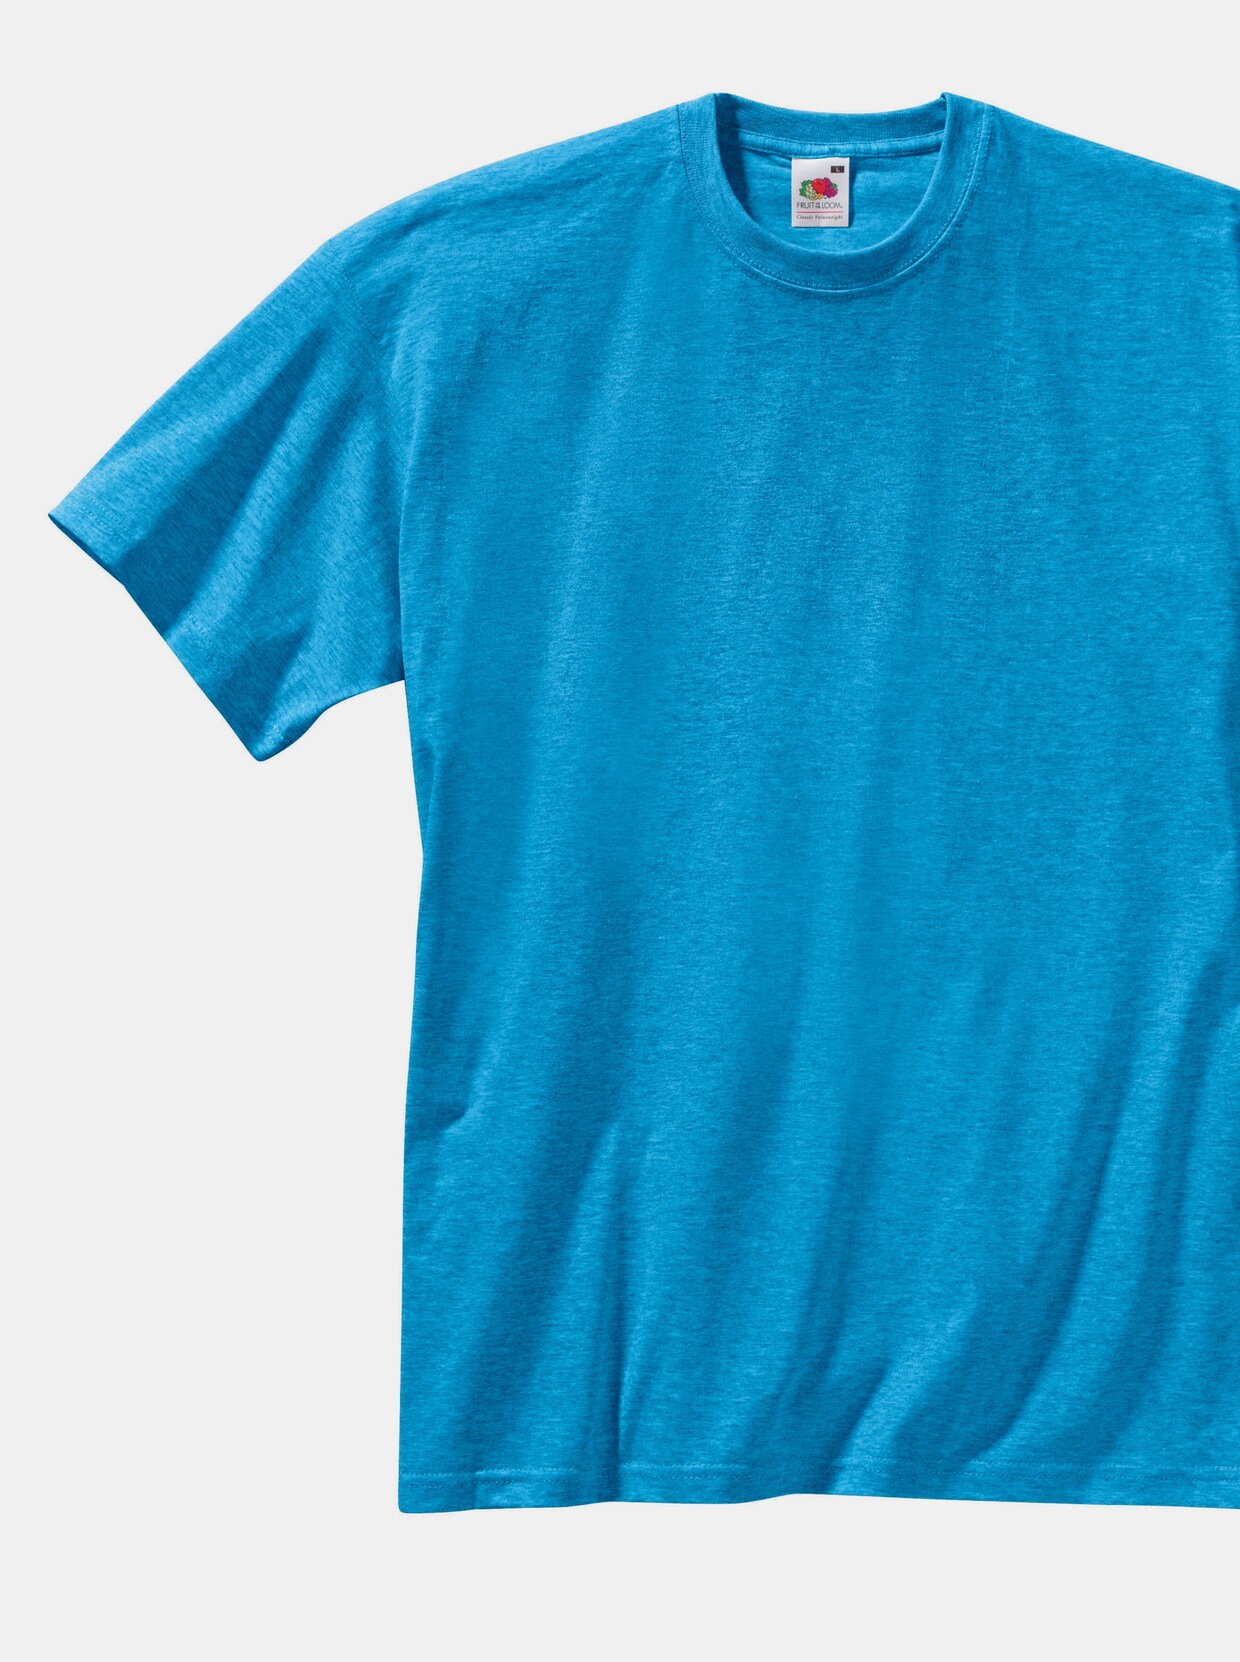 Fruit of the Loom T-shirt - turquoise + blanc